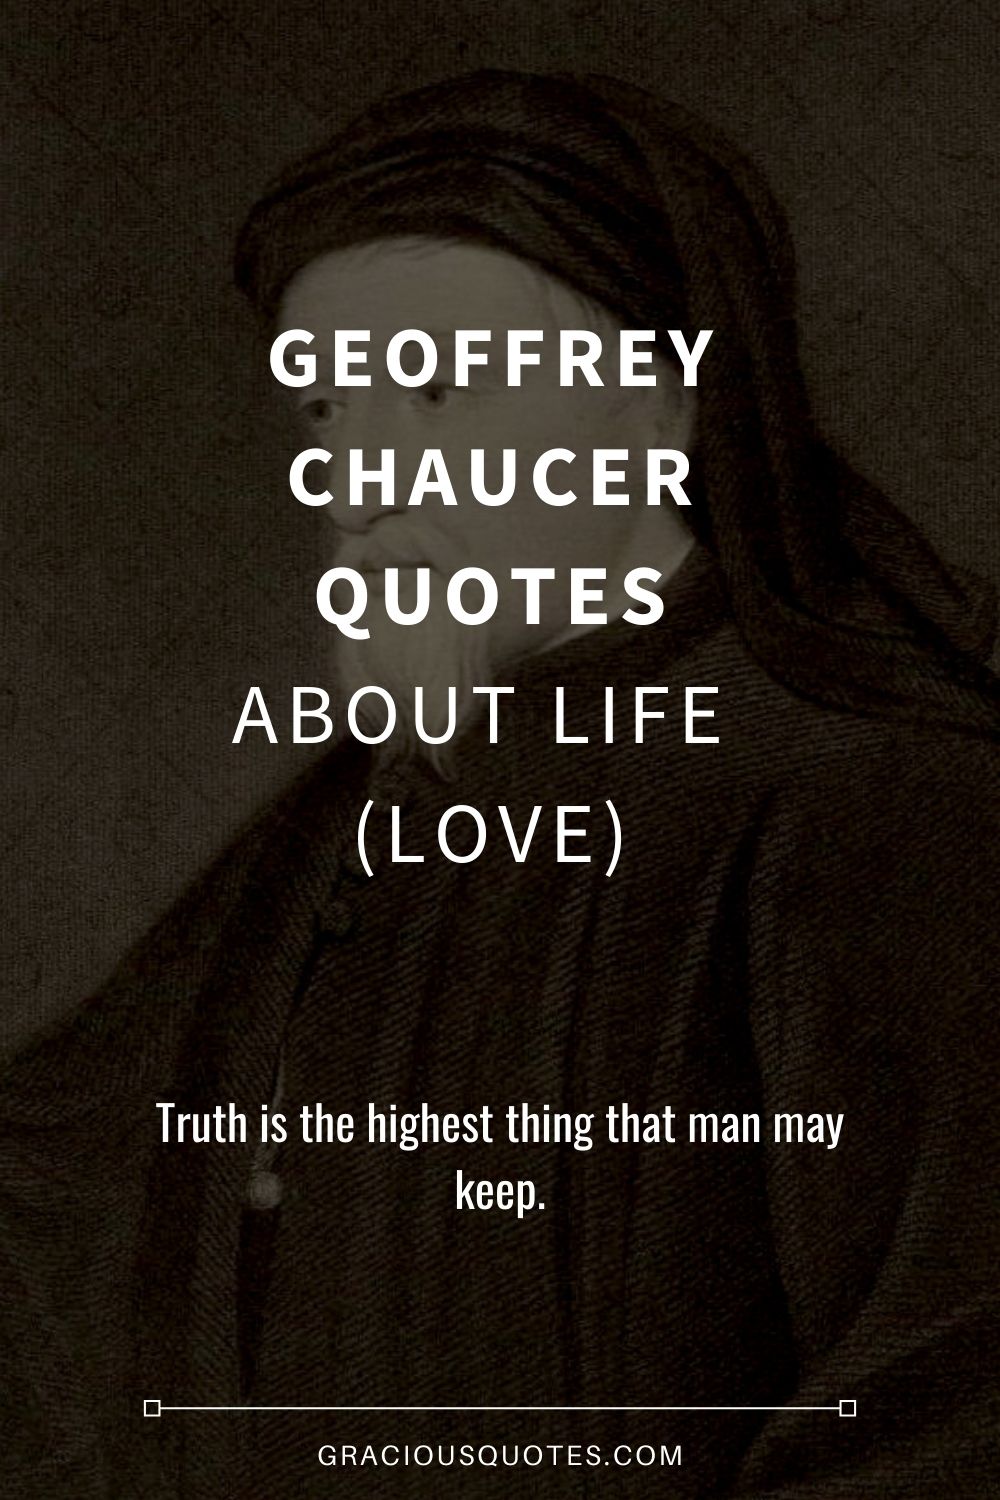 21 Geoffrey Chaucer Quotes About Life (Love)